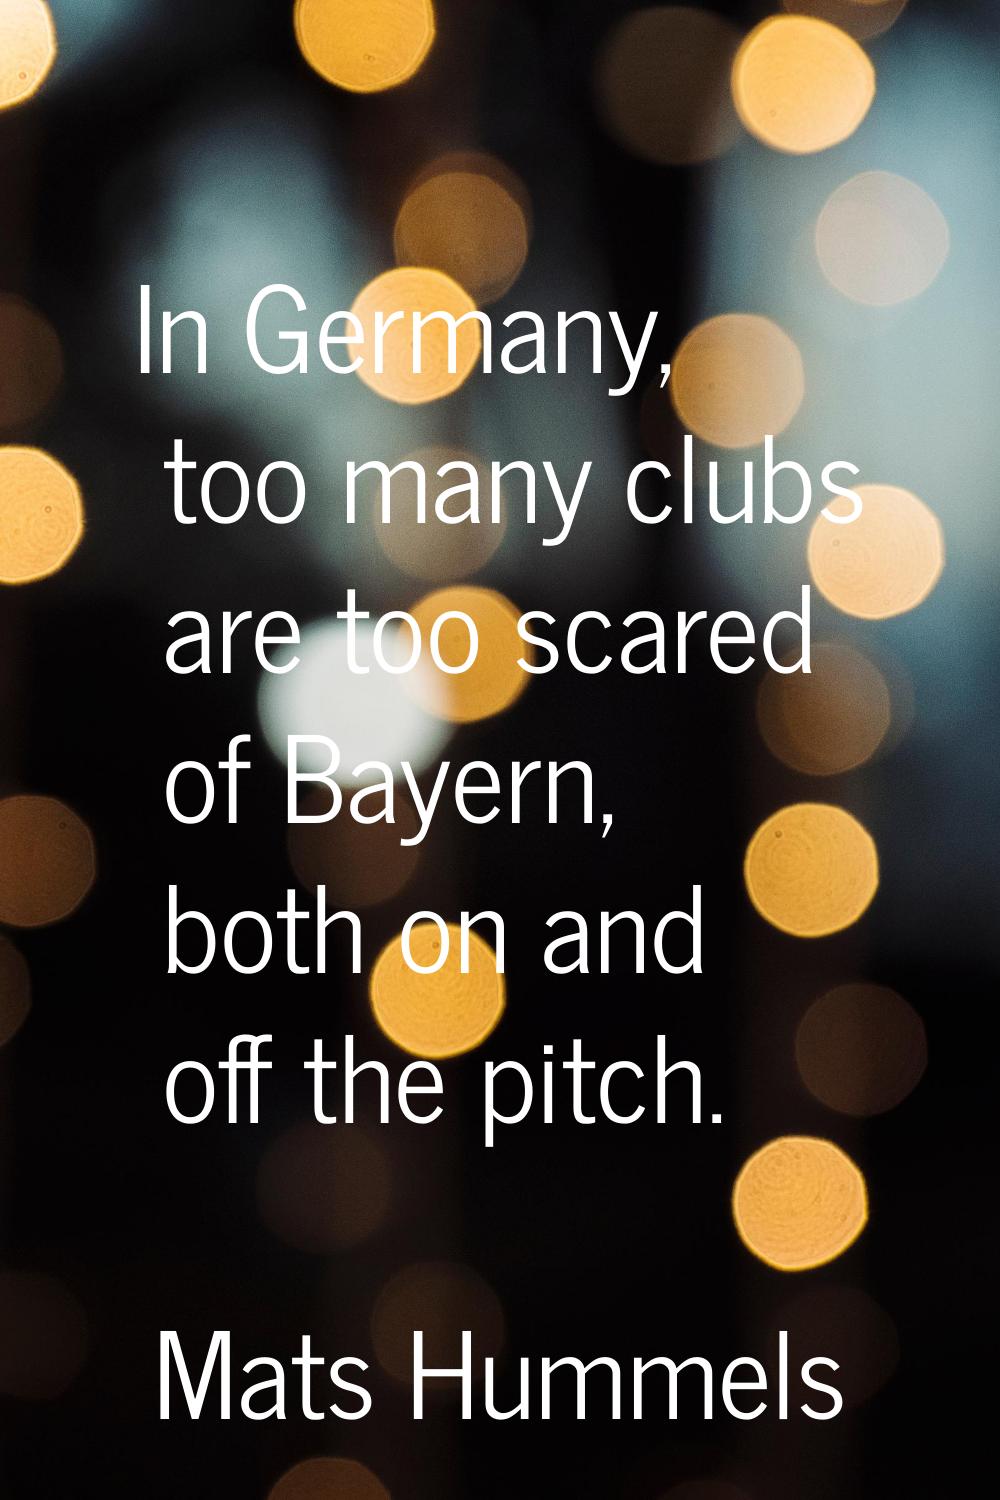 In Germany, too many clubs are too scared of Bayern, both on and off the pitch.